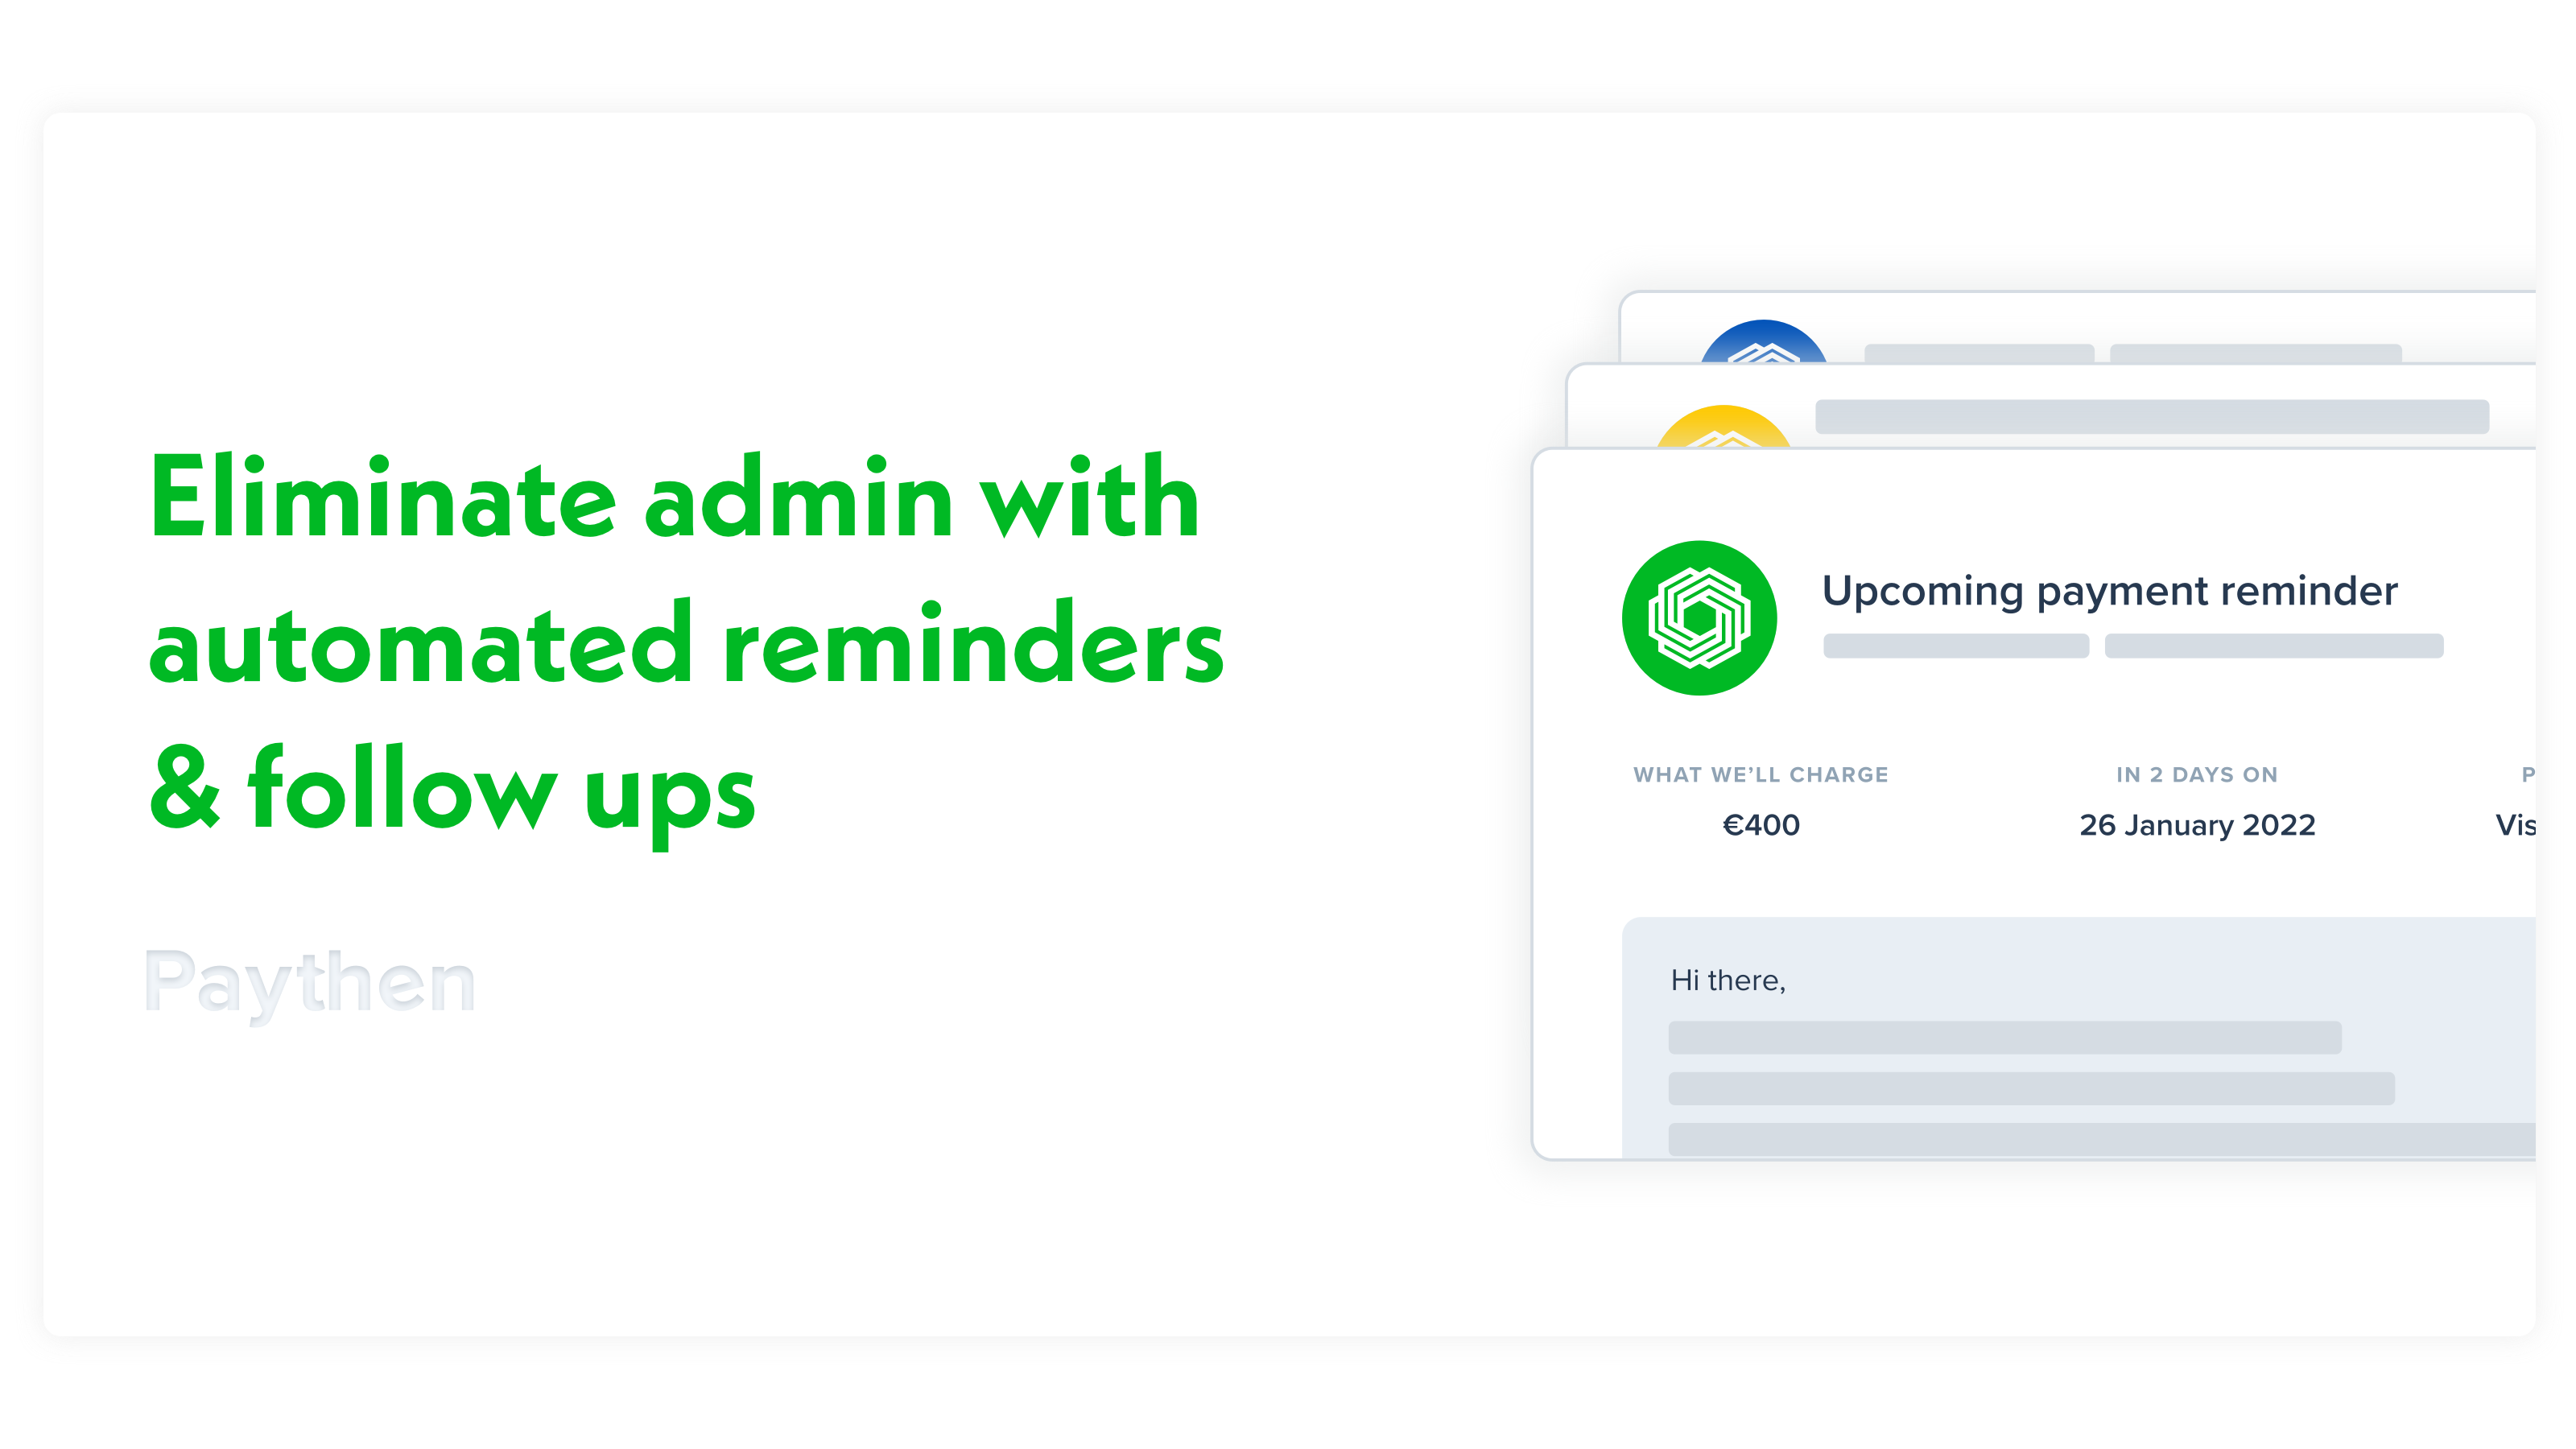 Your payment plans run on autopilot, with minimal admin